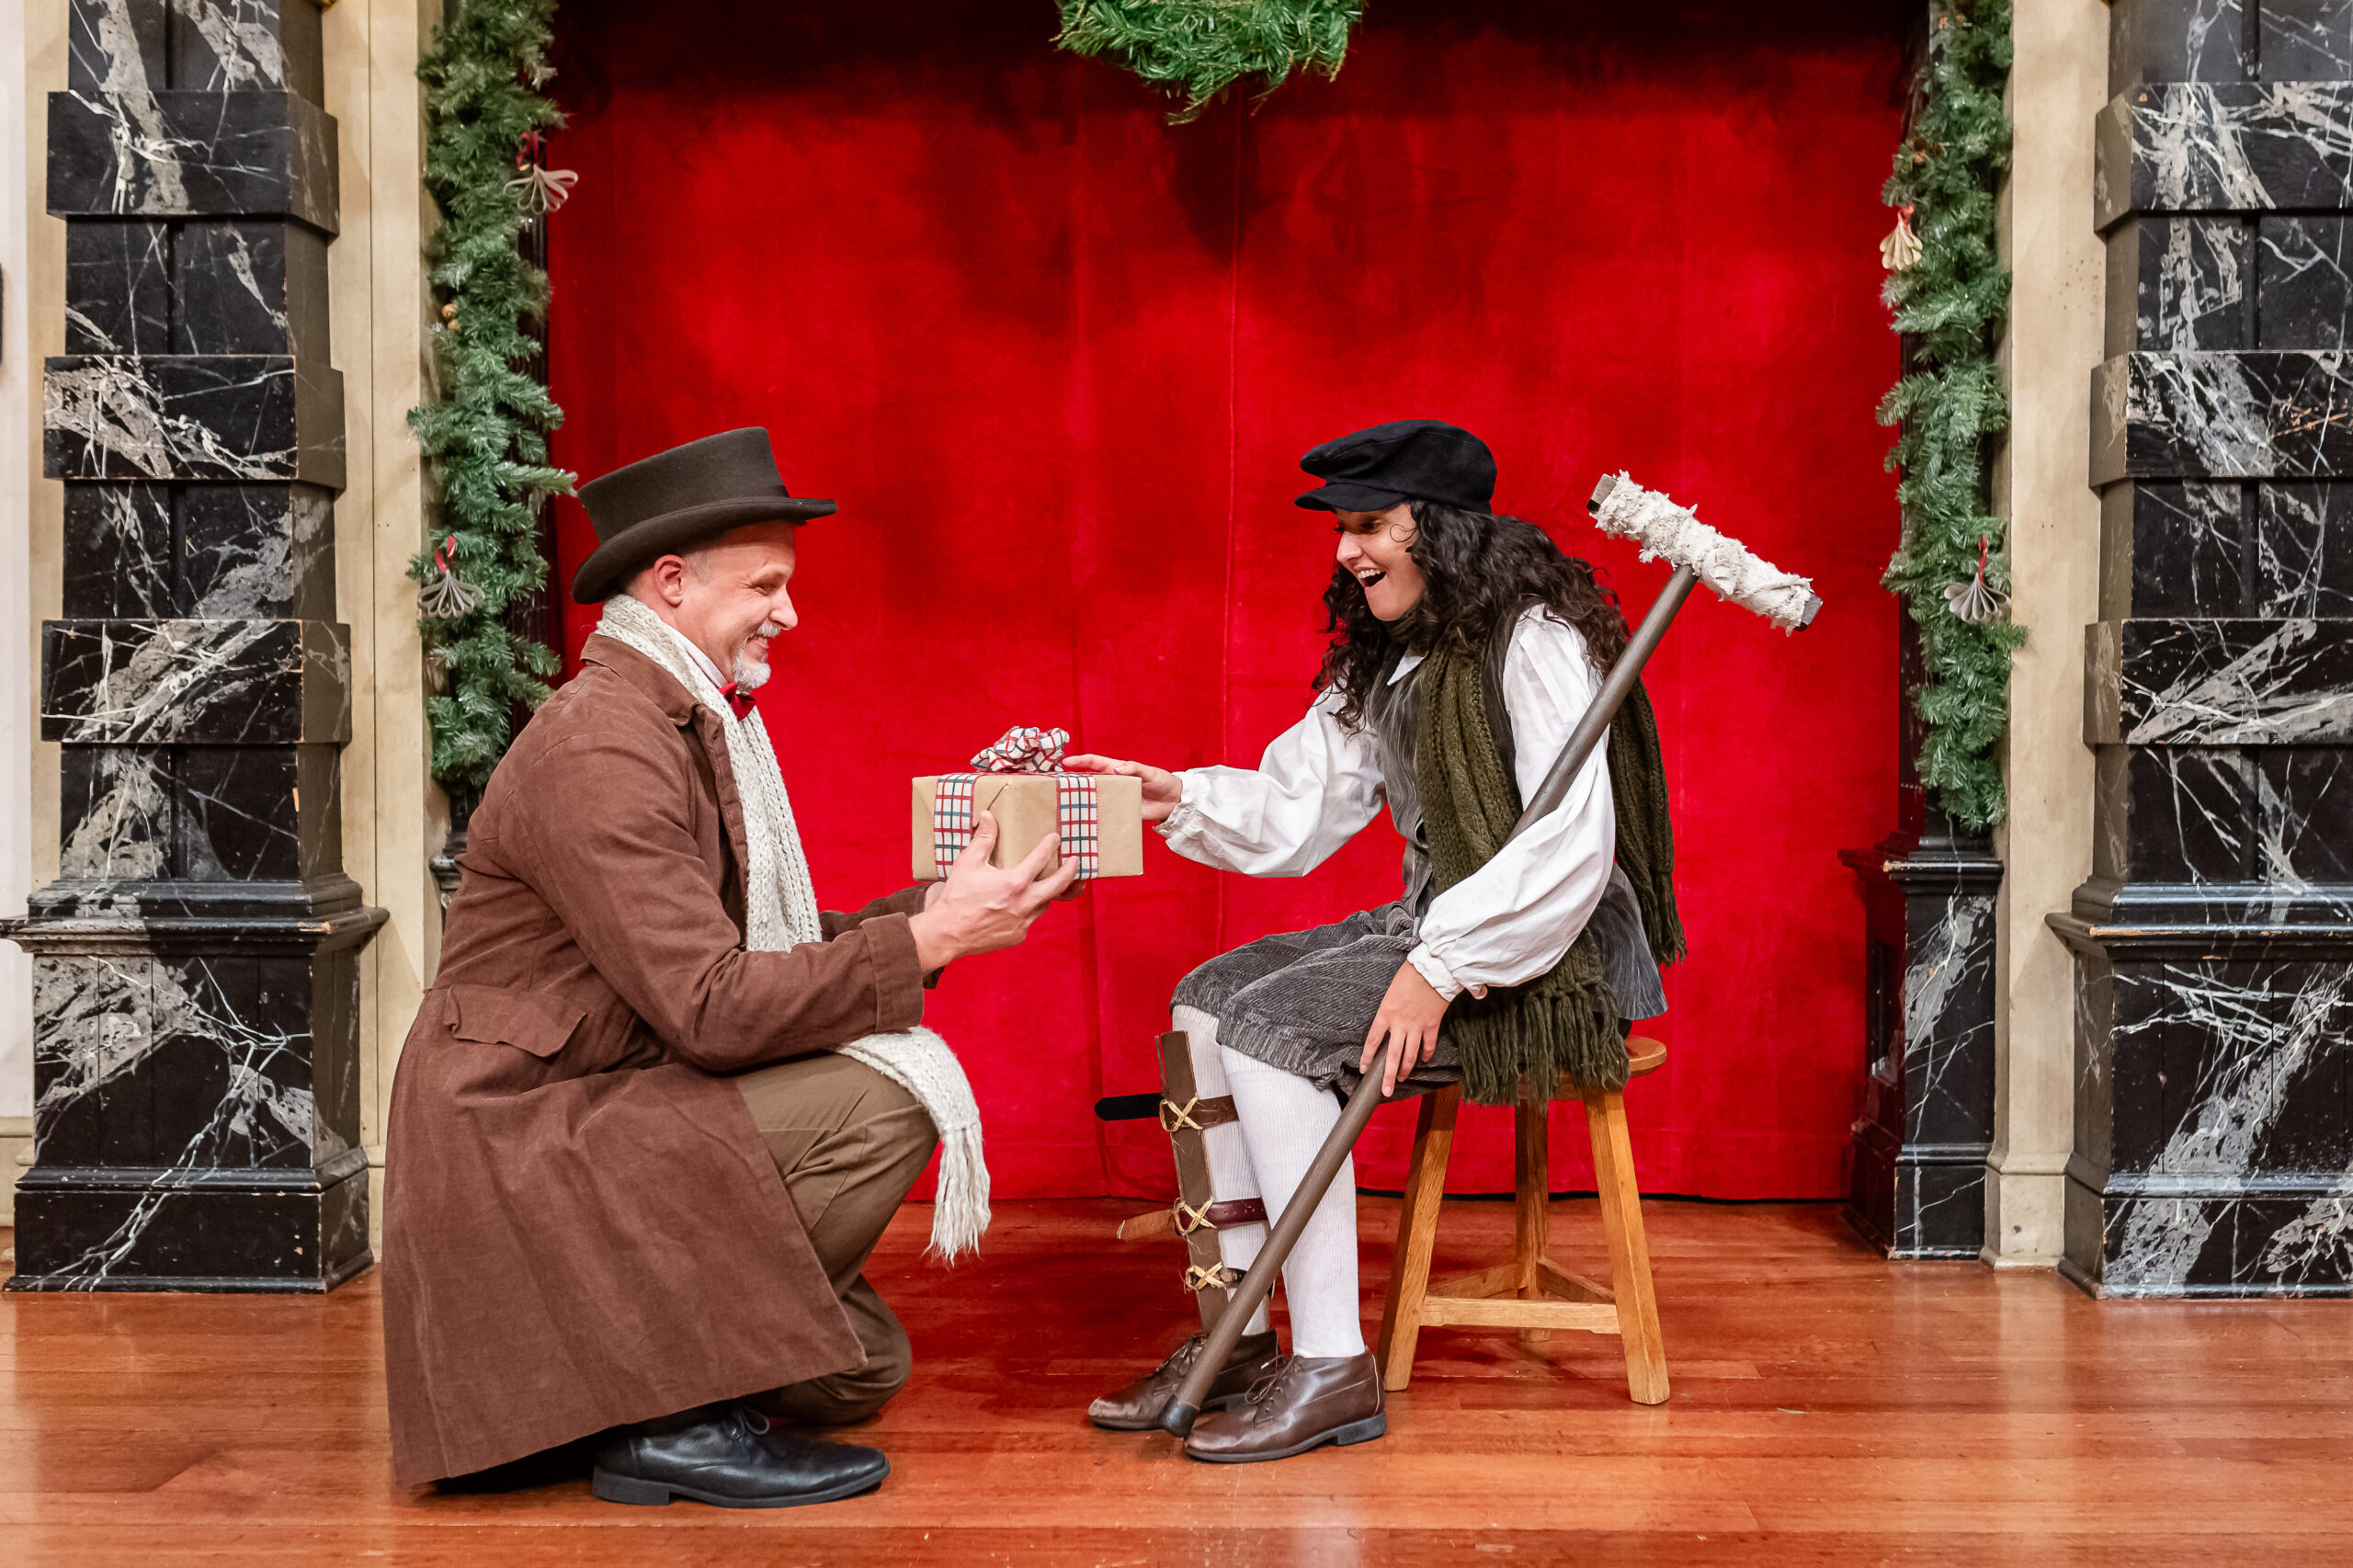 Ben Lambert and Molly Martinez-Collins star in A Christmas Carol at American Shakespeare Center Blackfriars Playhouse in Staunton, VA. Photo by October Grace Media.